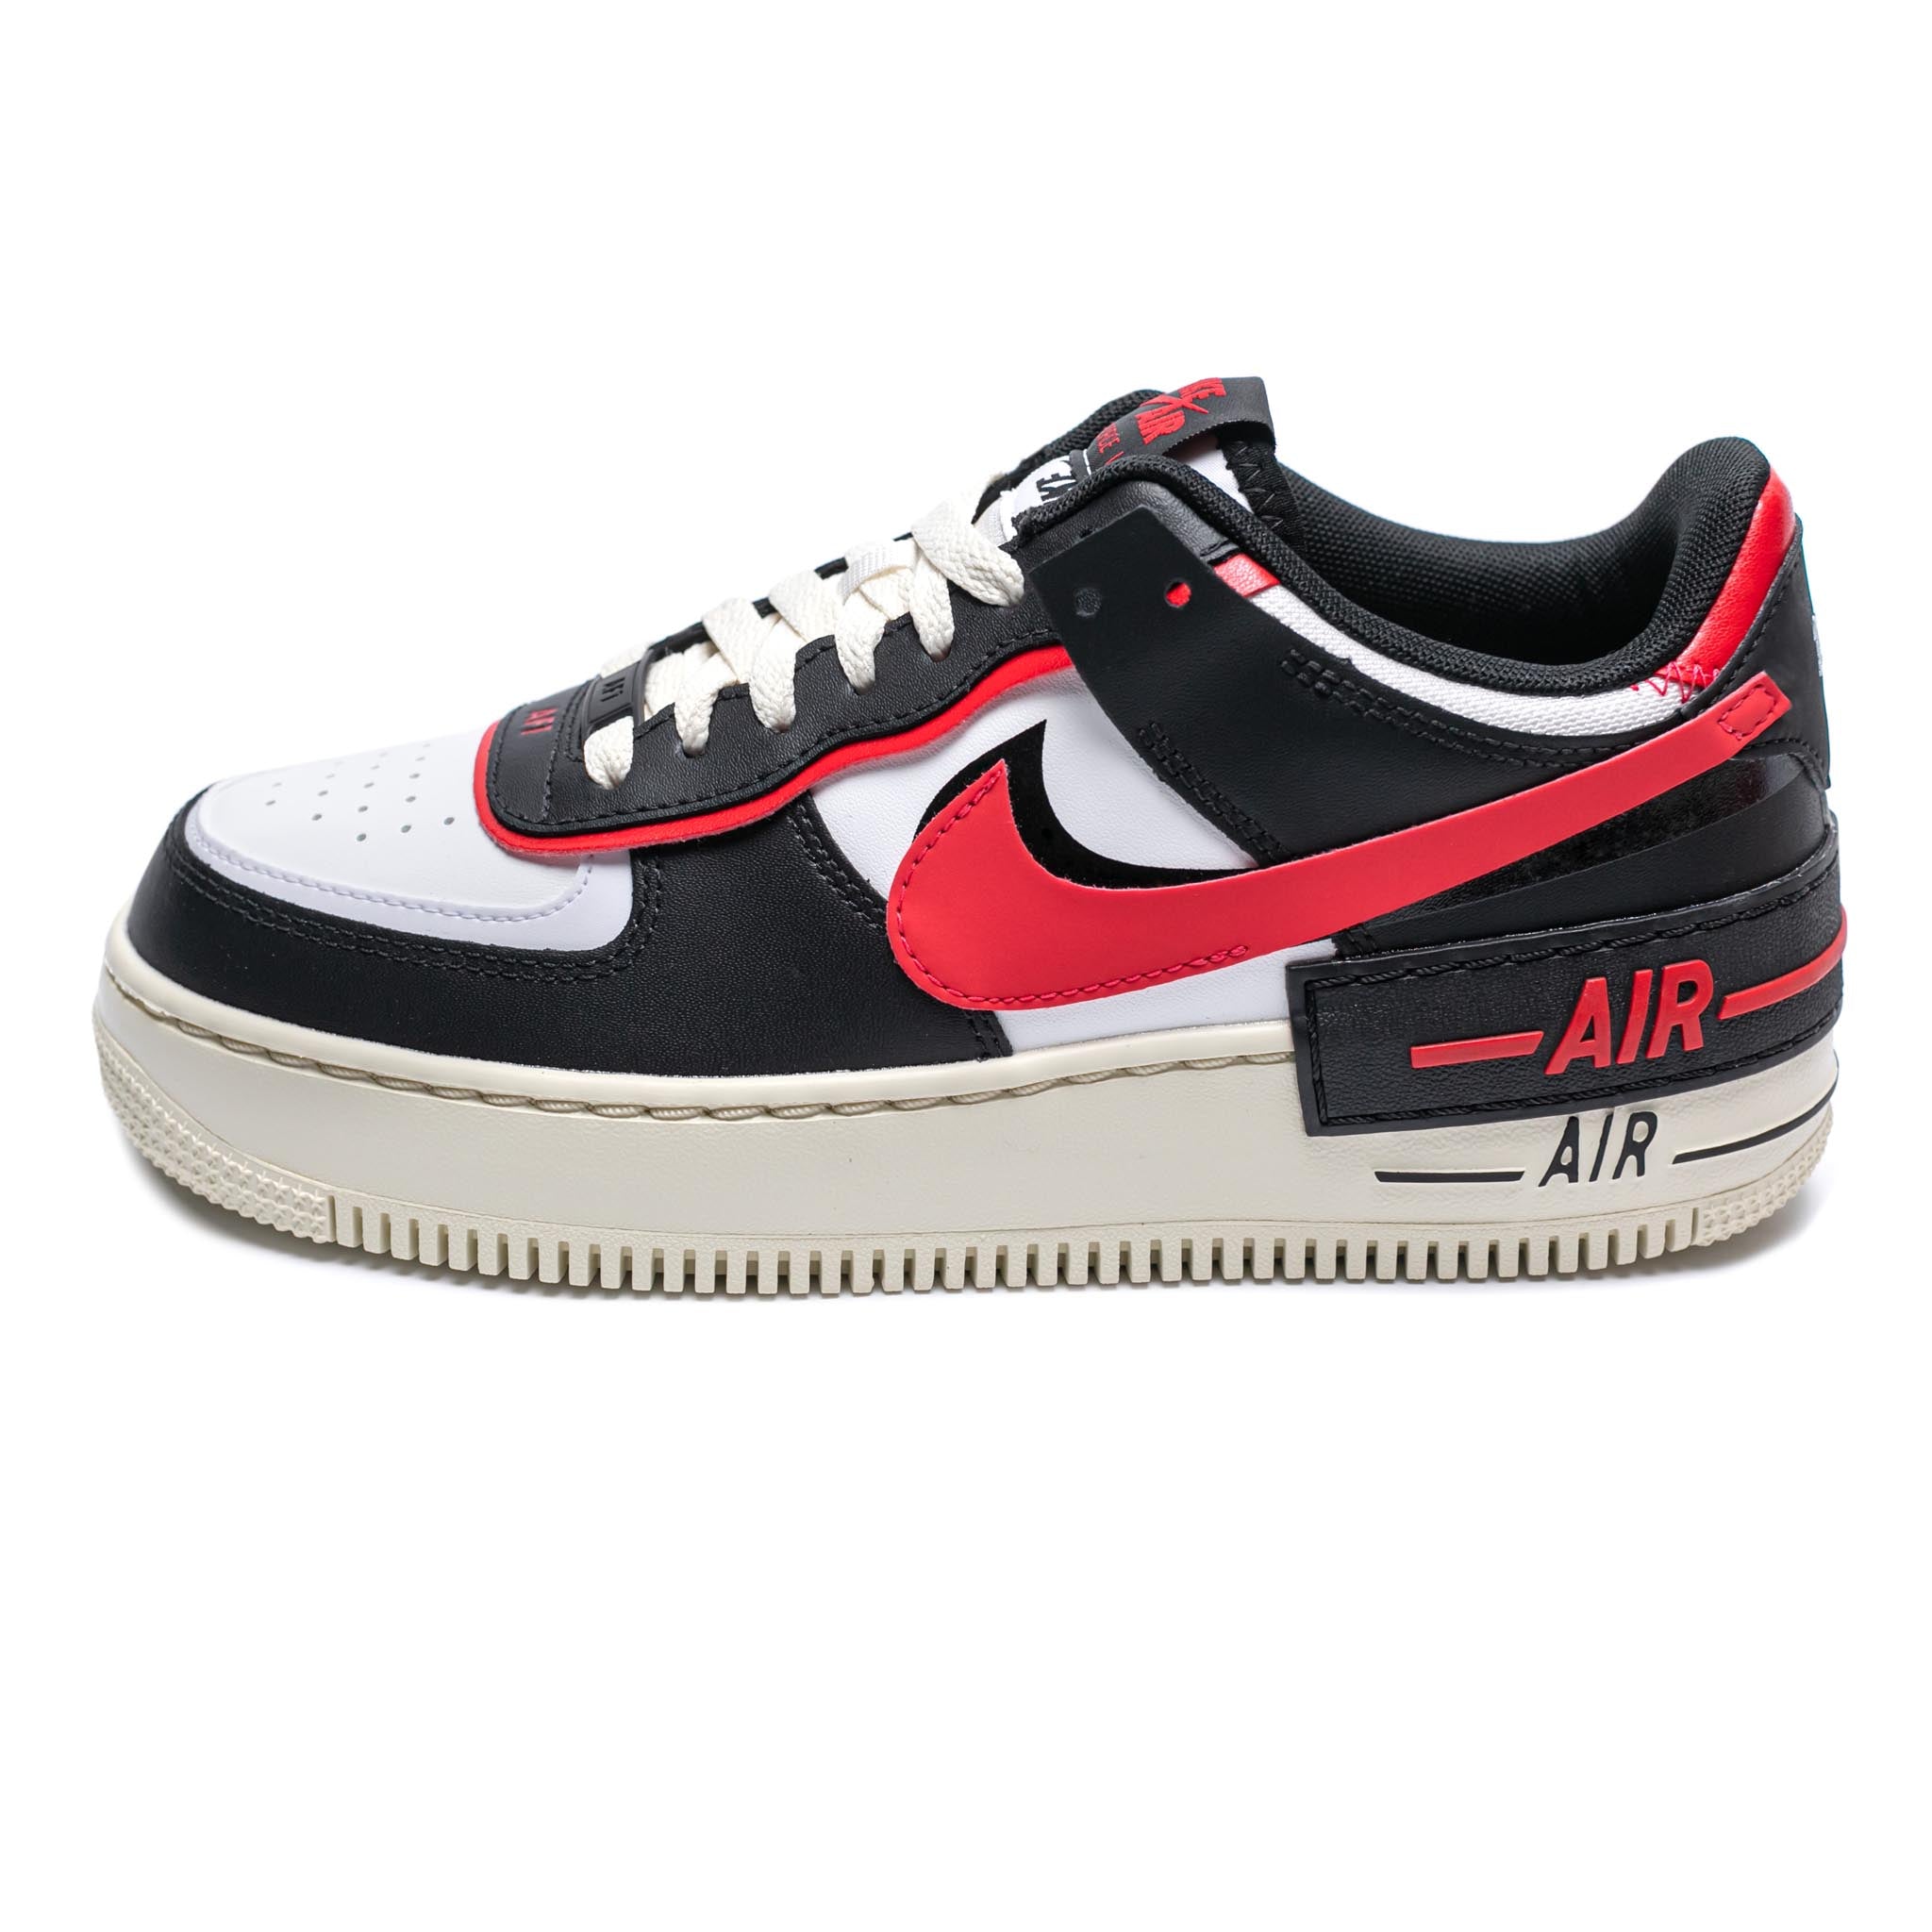 Nike WMNS Air Force 1 Shadow University Red DR7883-102